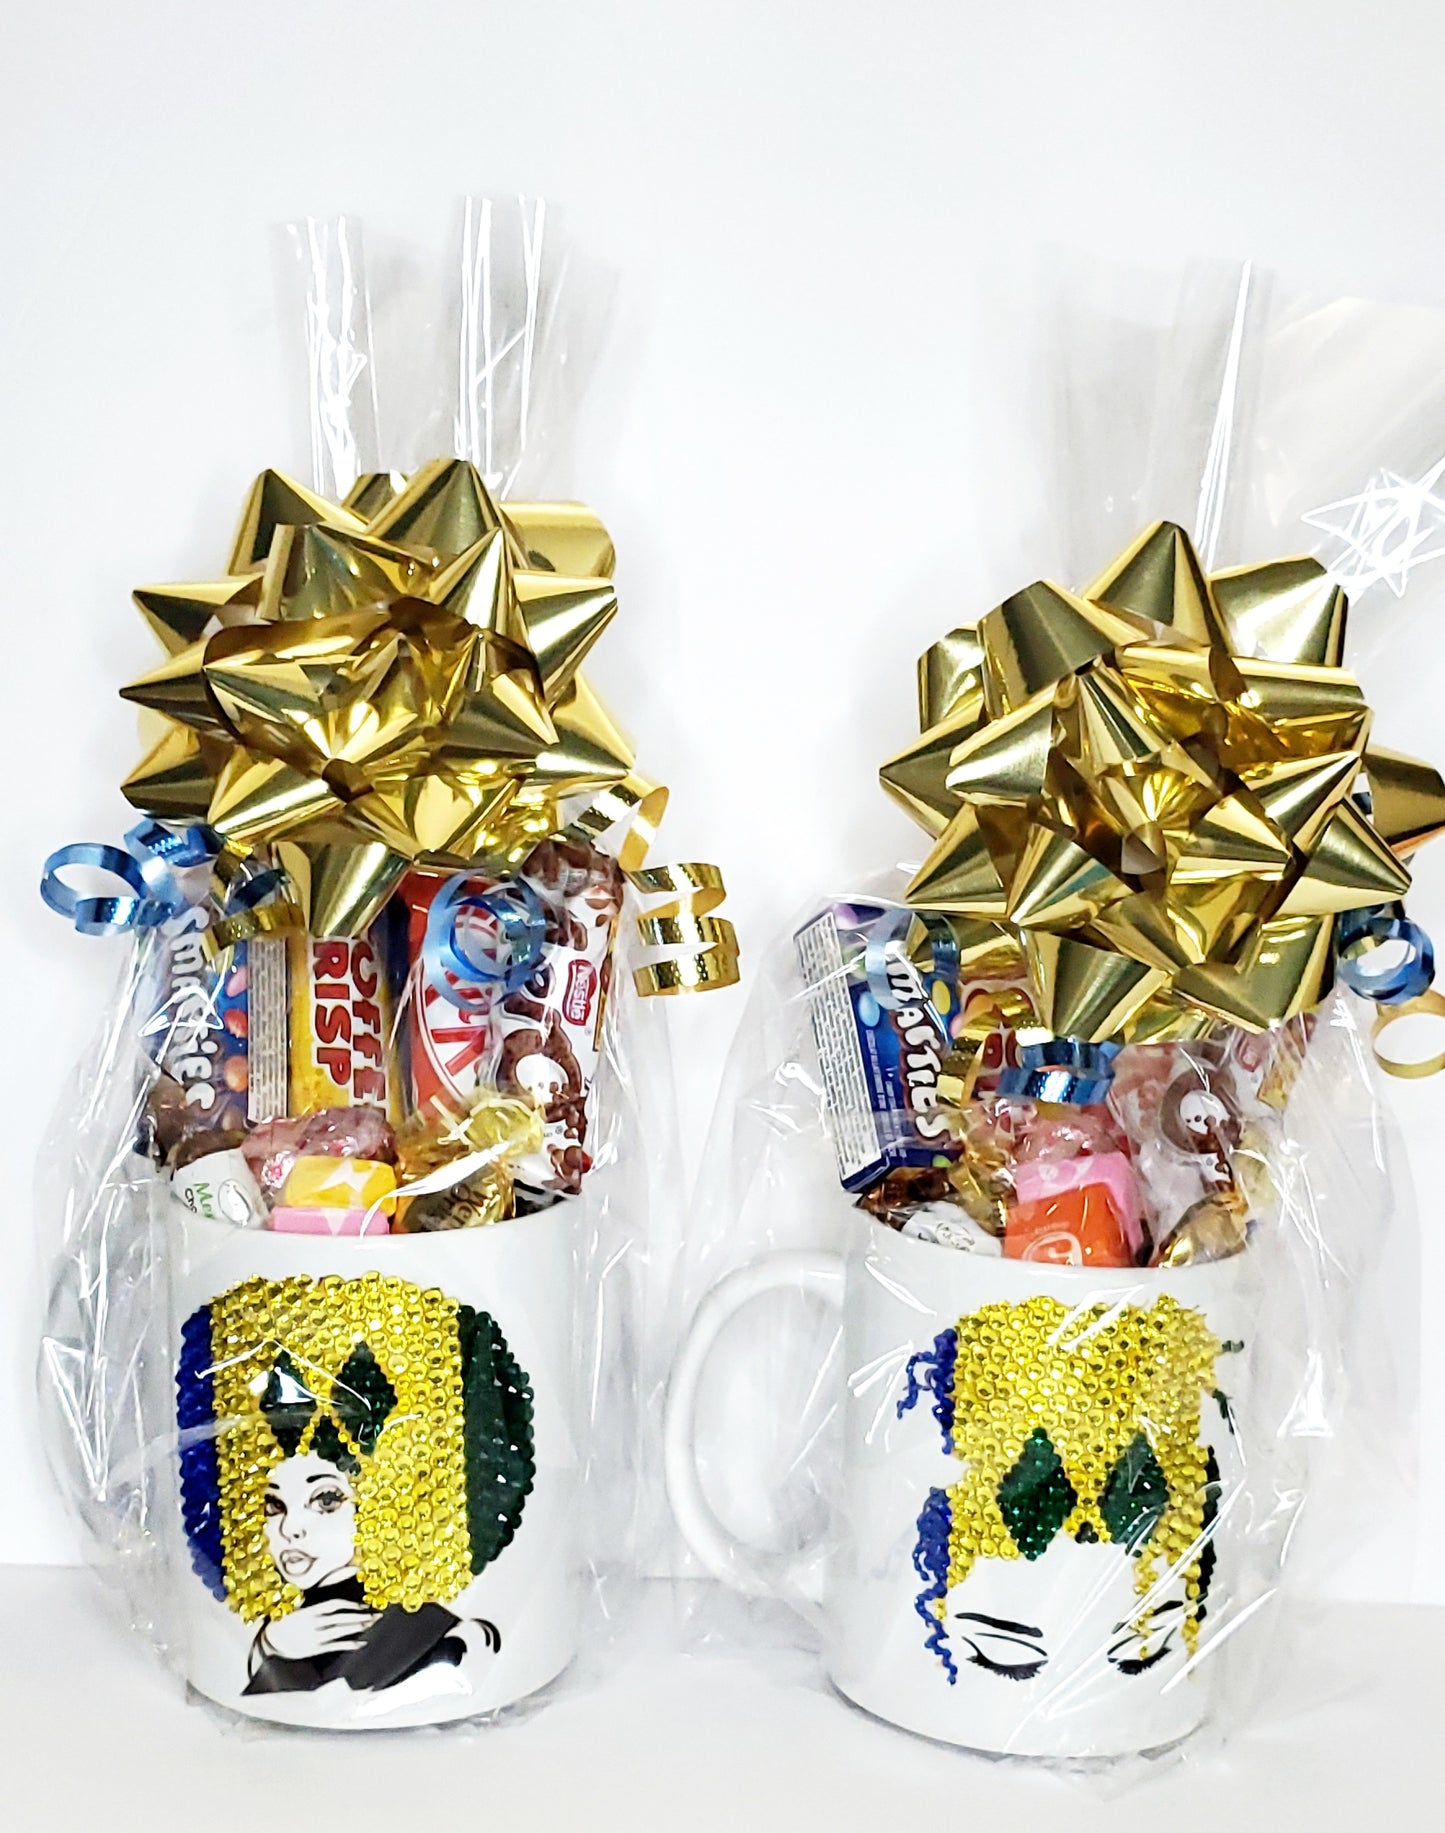 Add-on mug and wine glass gift packaging